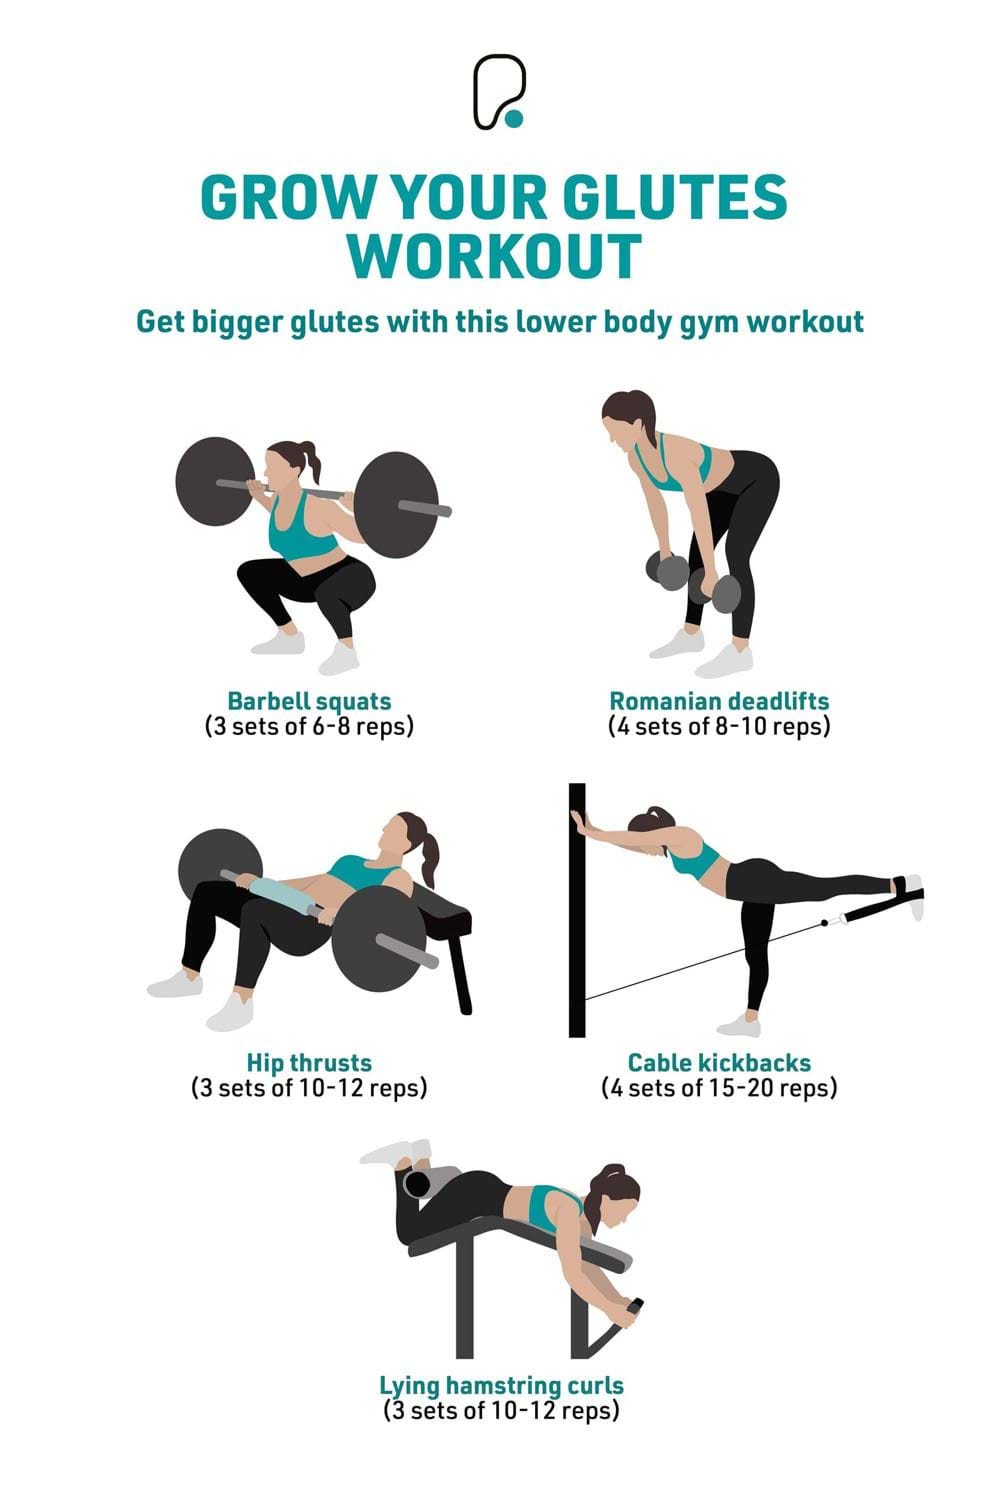 Grow your glutes workout